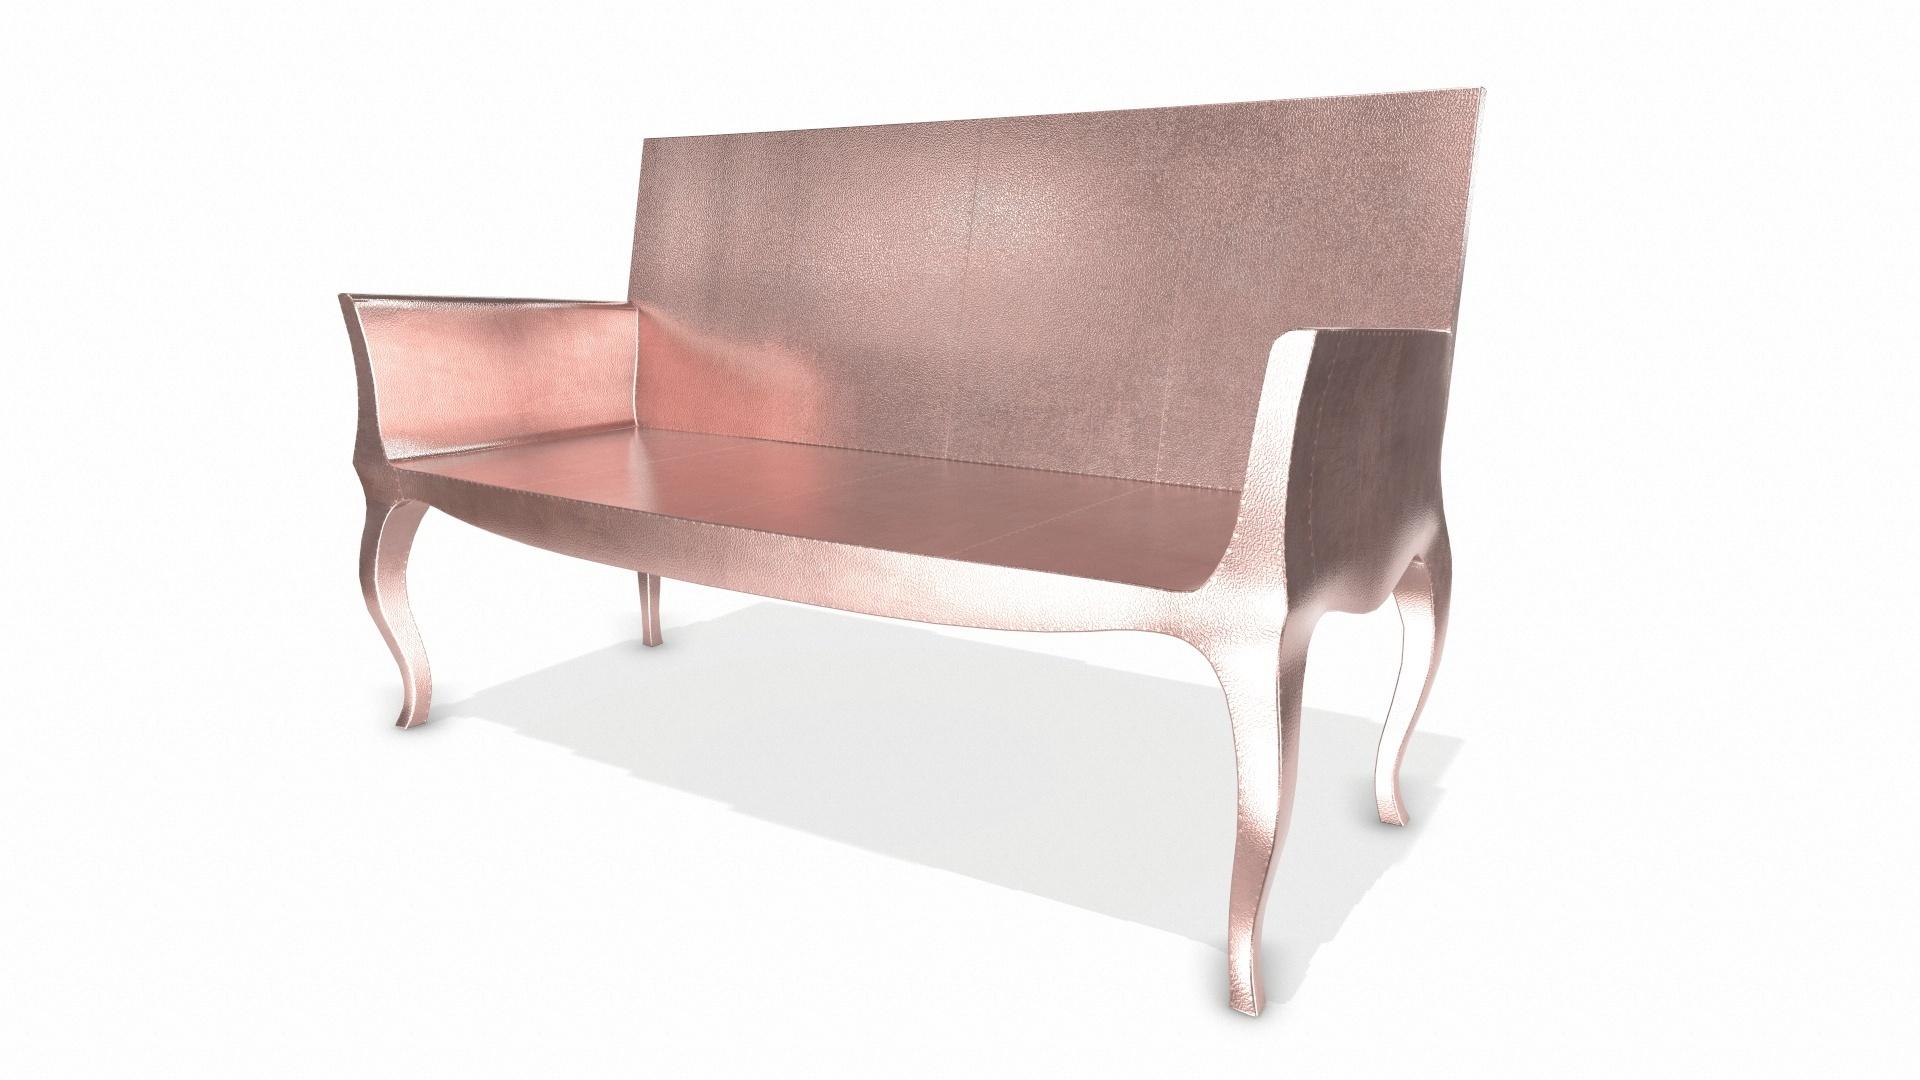 American Louise Settee Art Deco Benches in Fine Hammered Copper by Paul Mathieu For Sale